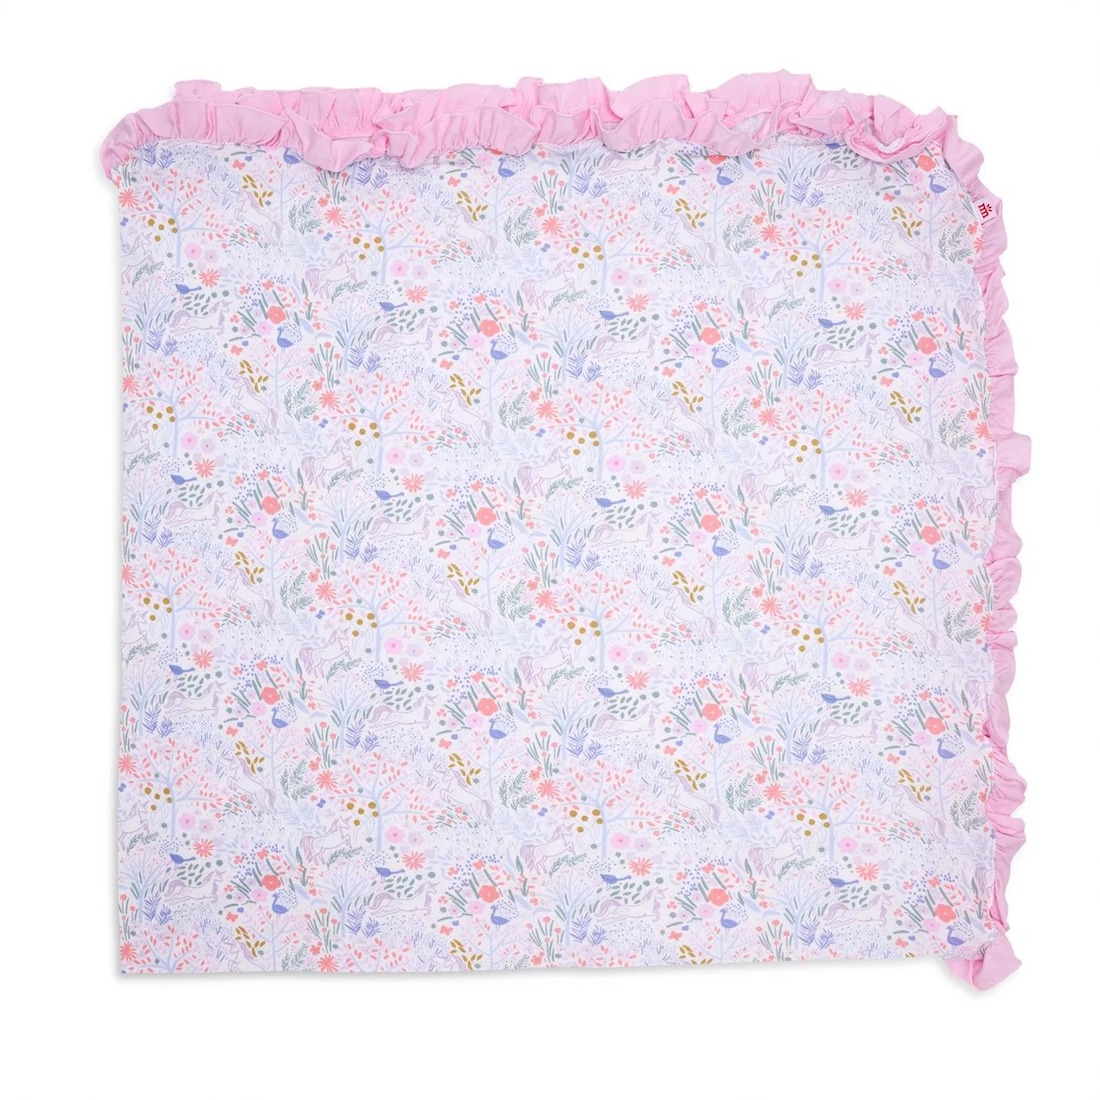 Magnetic Me pixie pines modal swaddle blanket